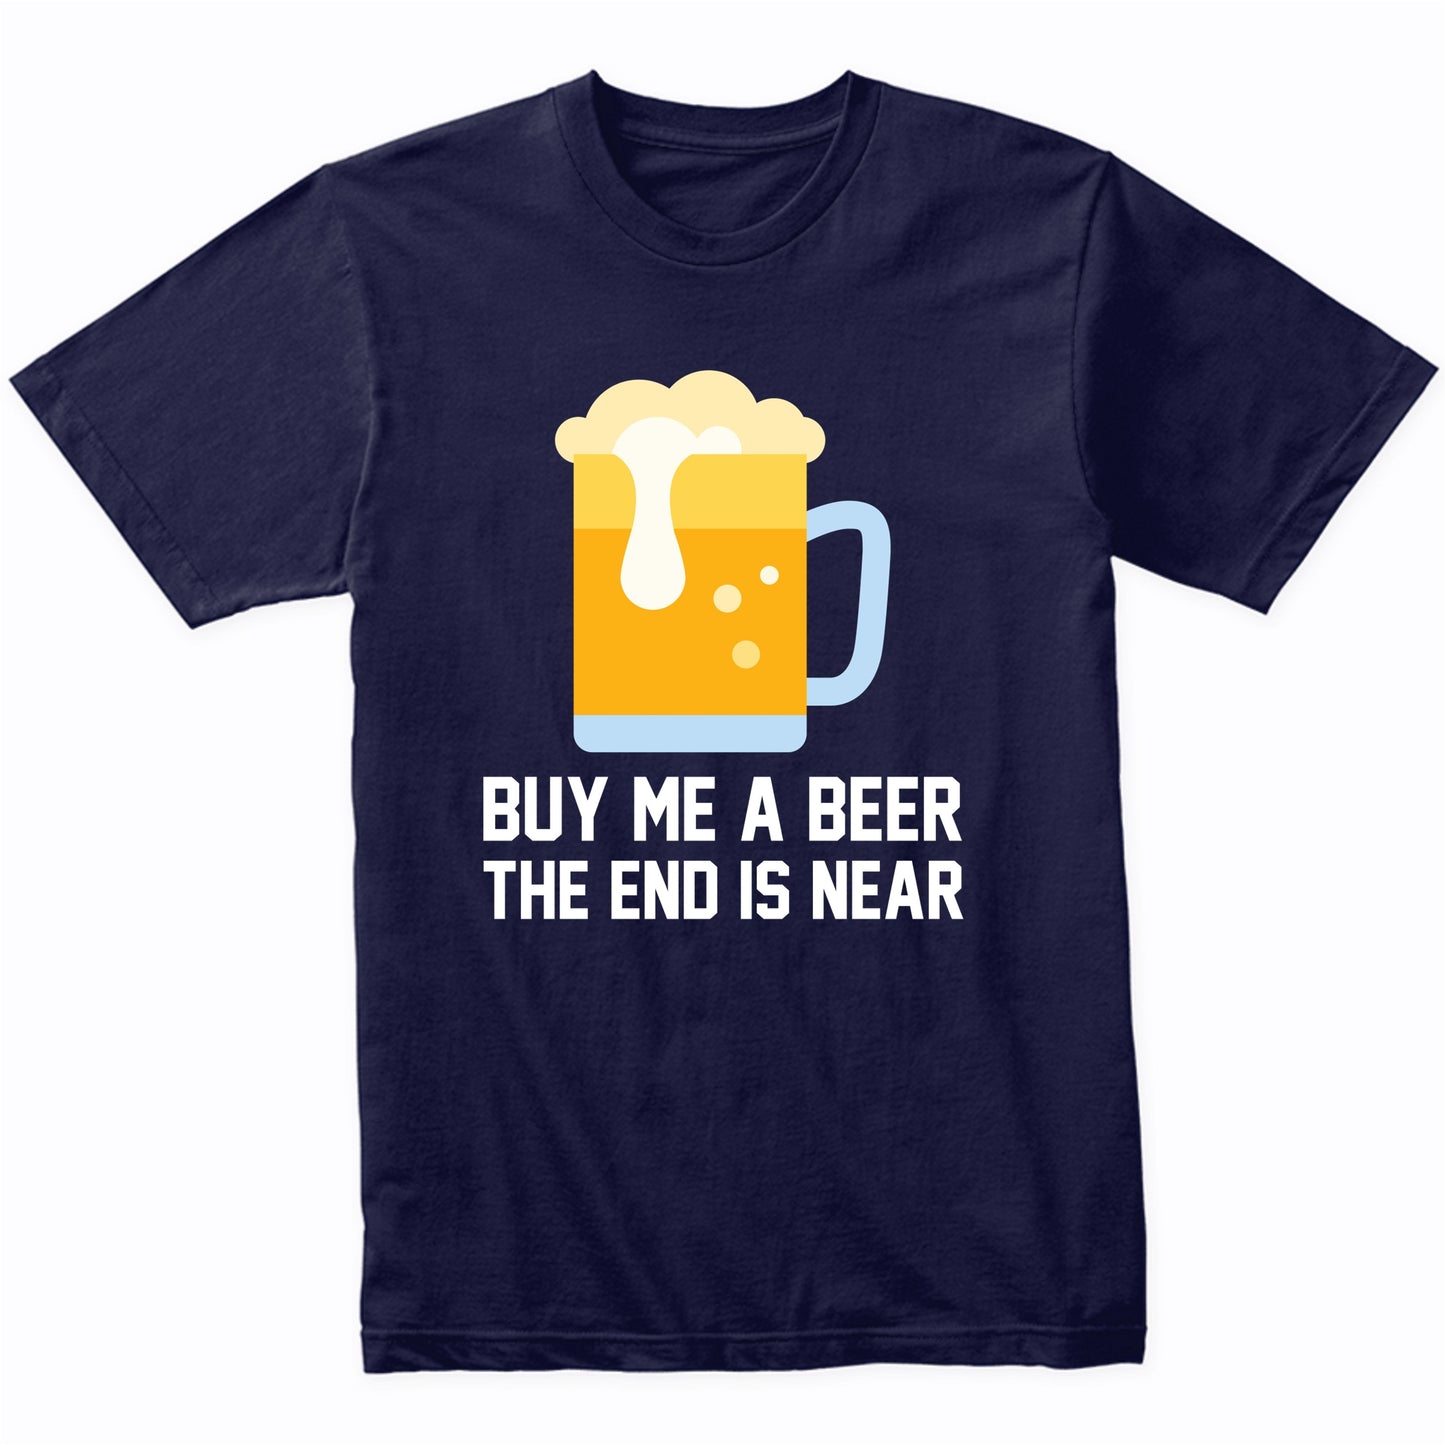 Funny Bachelor Party Shirt Buy Me A Beer The End Is Near